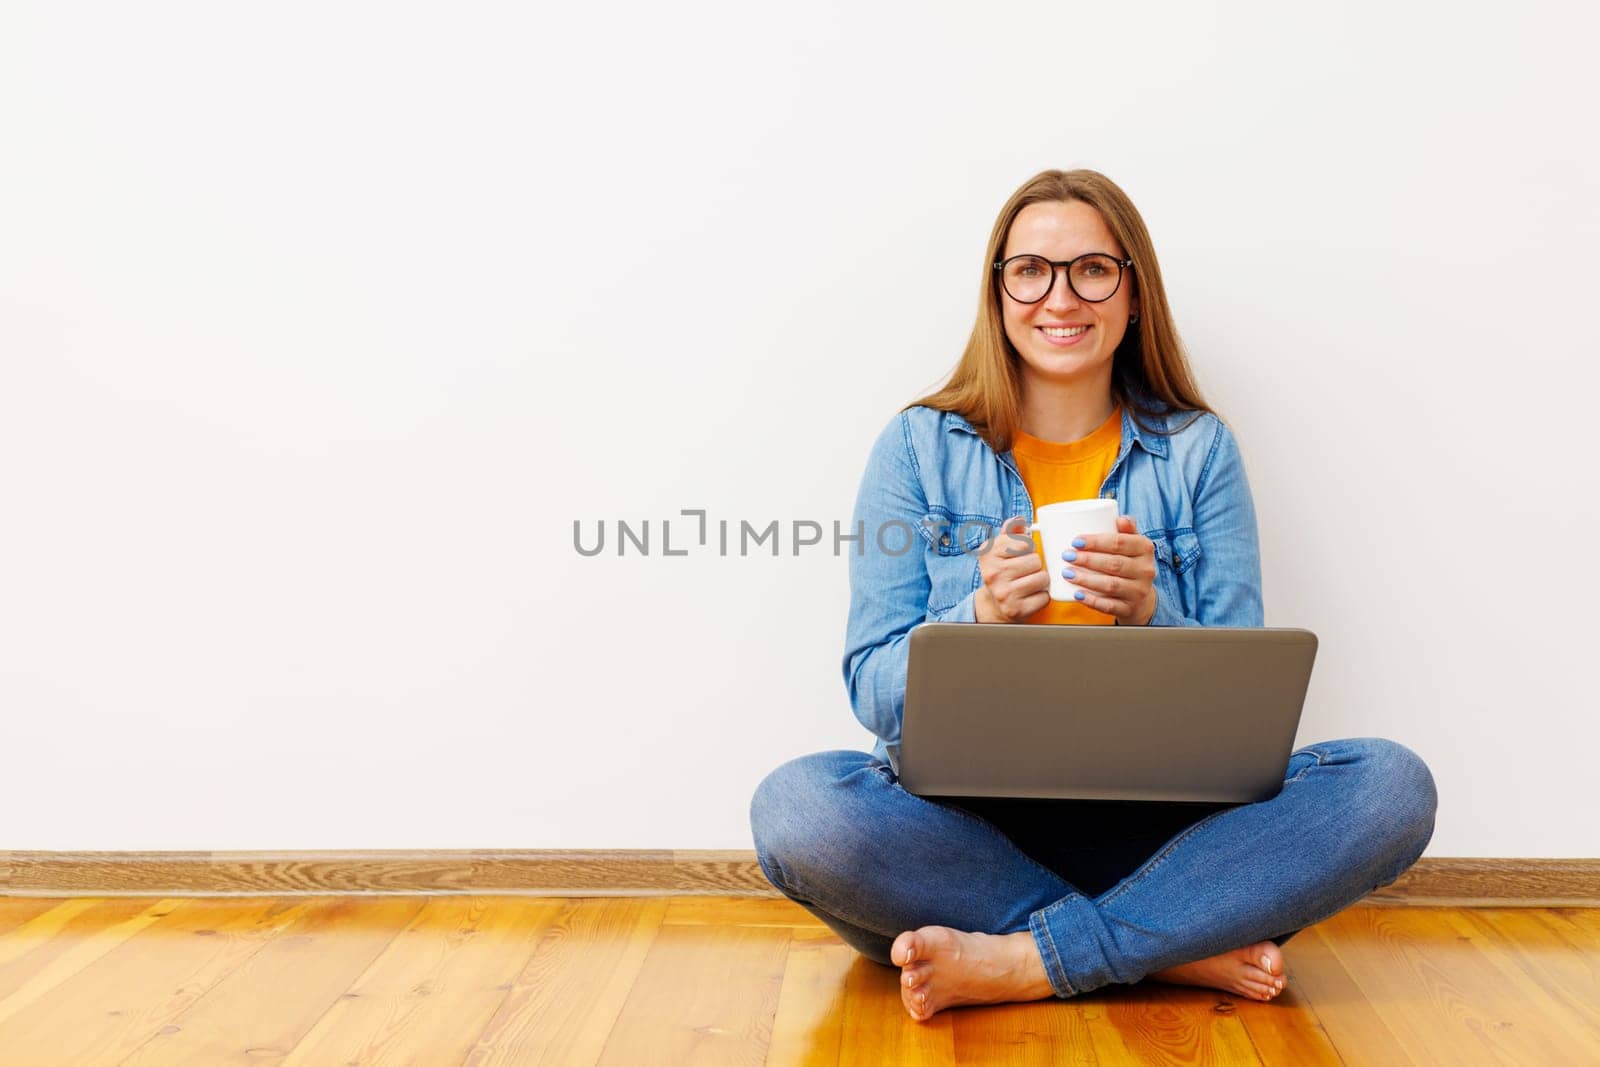 Content Woman with Laptop and Coffee Mug Sitting on Floor.